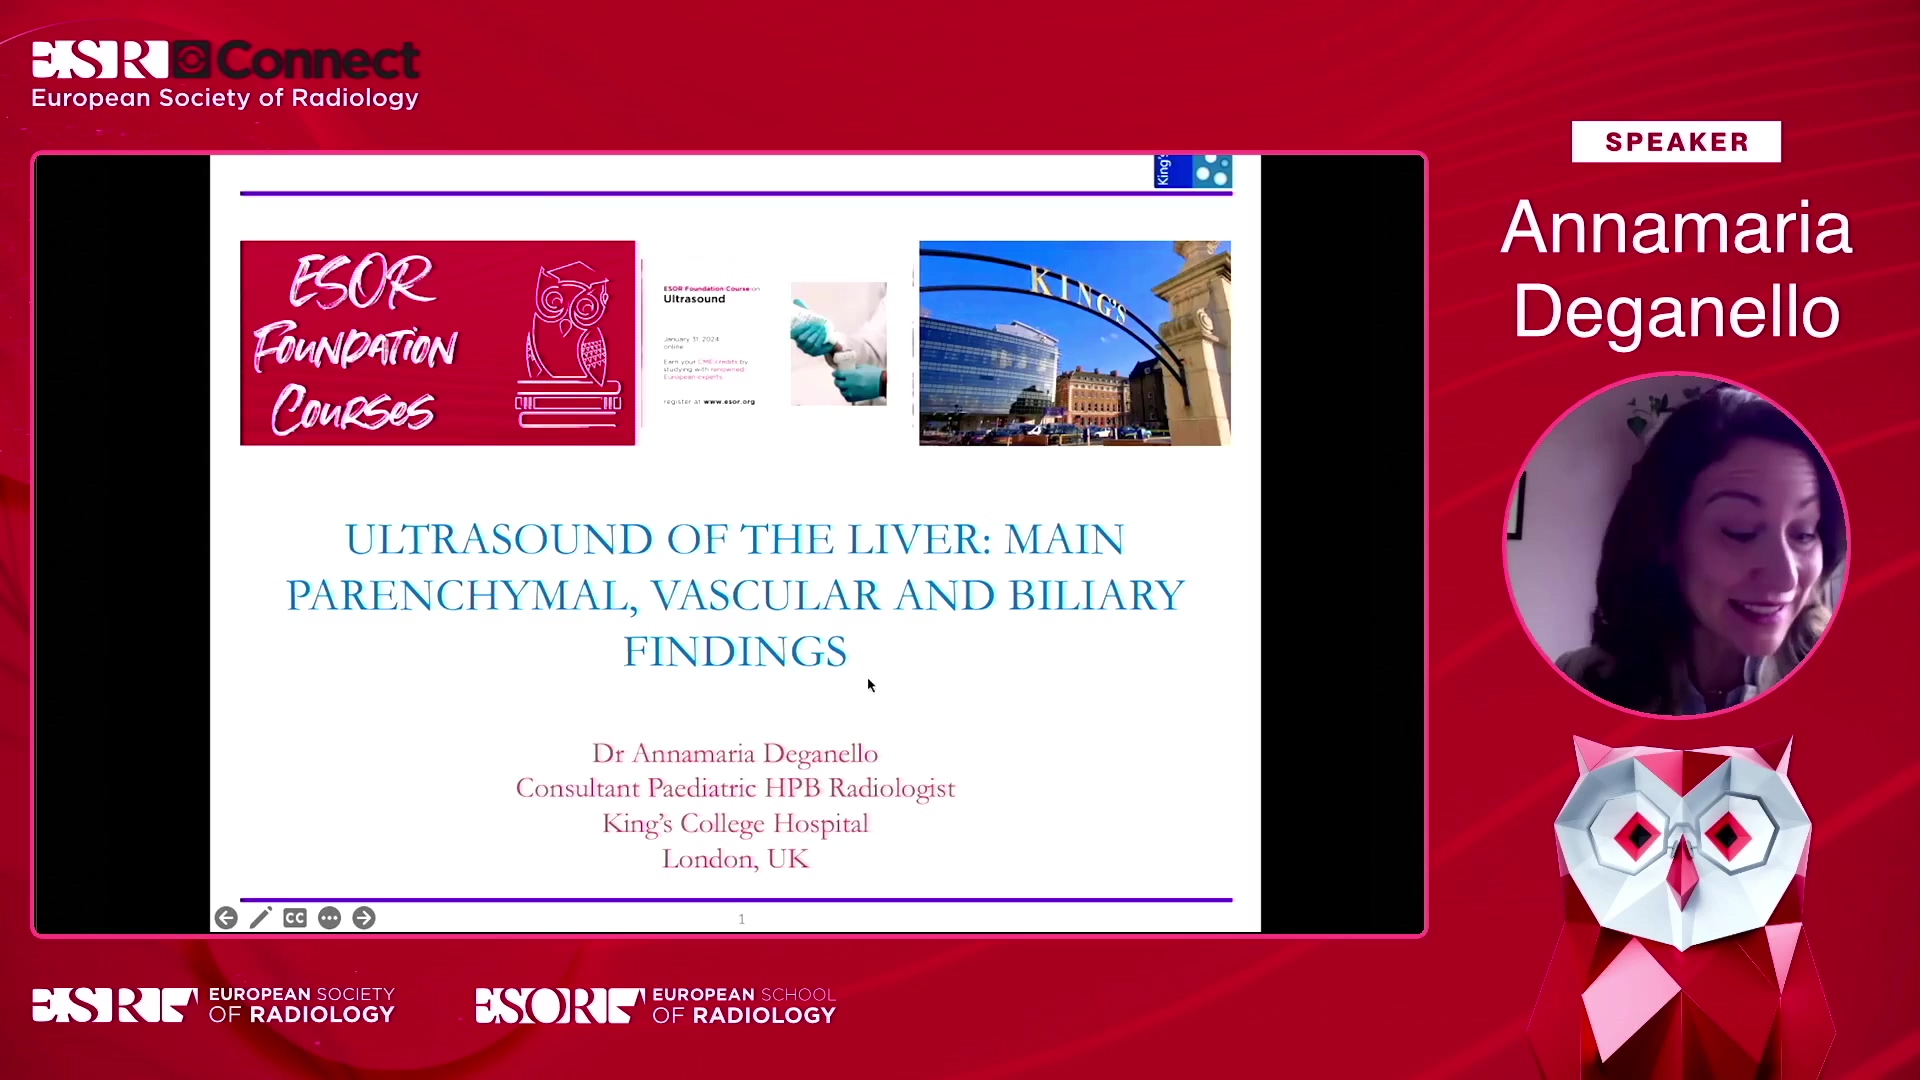 Ultrasound of the liver: main parenchymal, vascular and biliary findings - A. Degnallo, London / UK